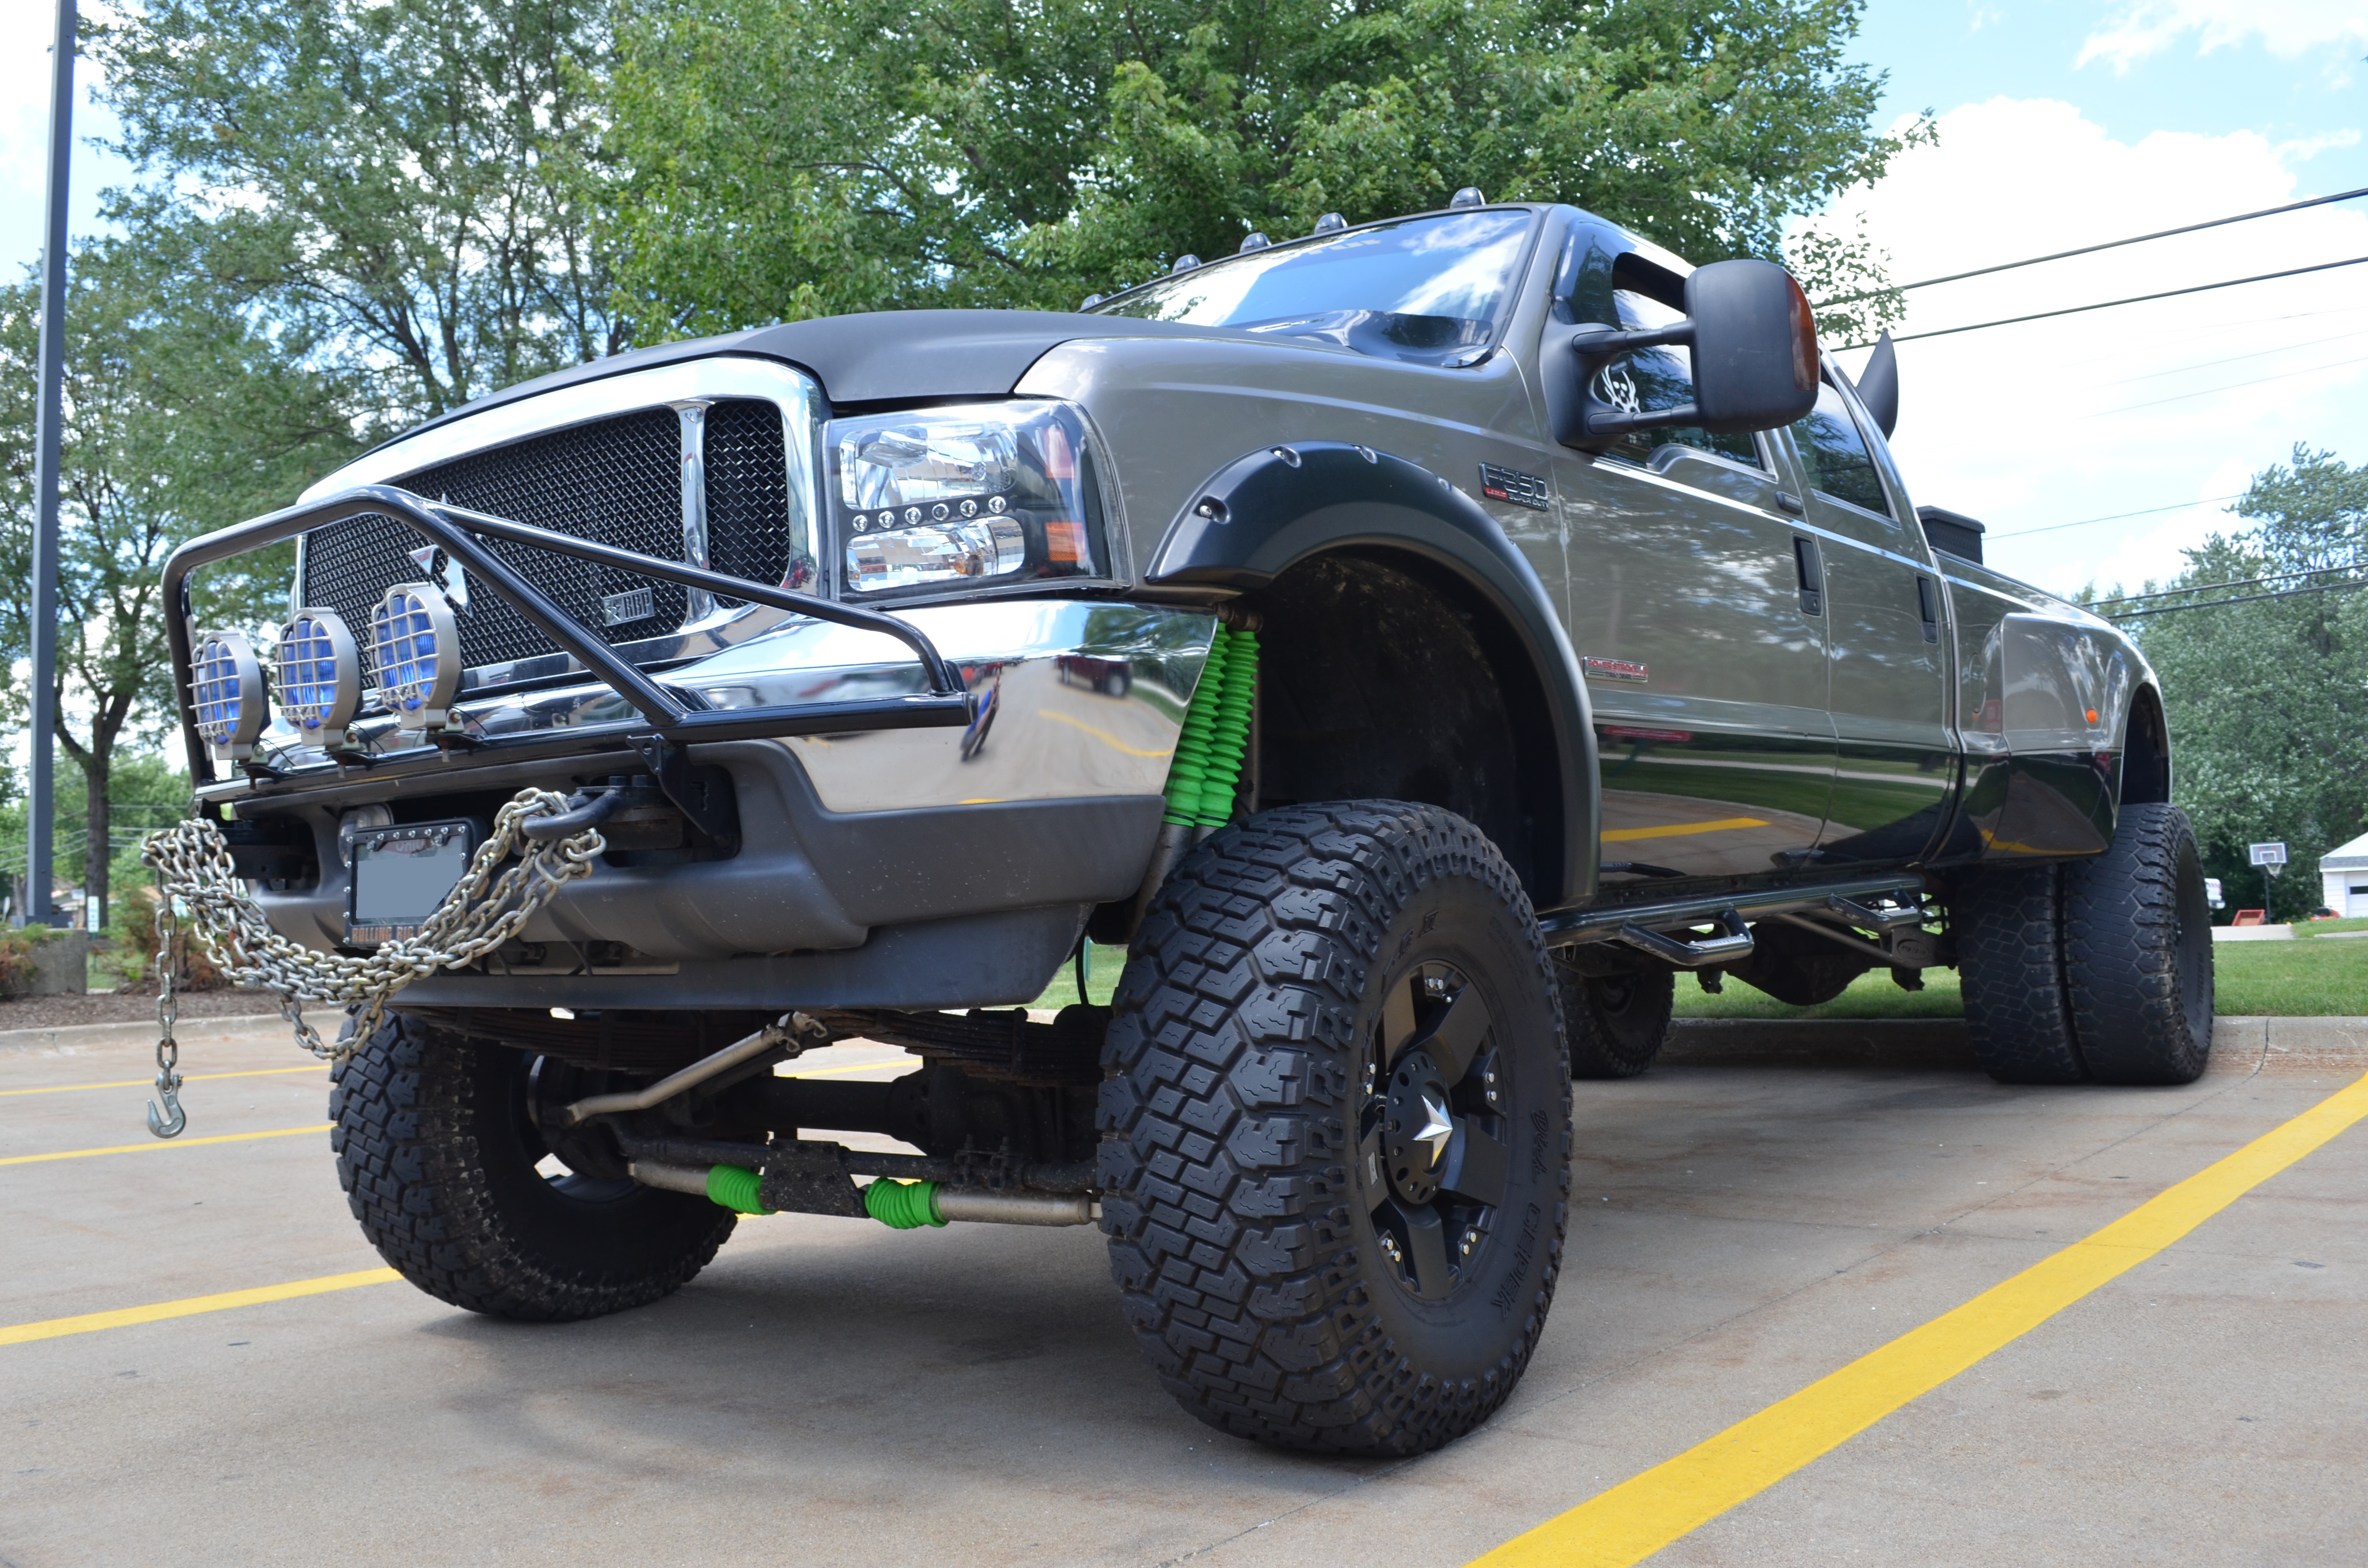 Lot Shots Find of the Week: Ford F-350 Diesel - OnAllCylinders